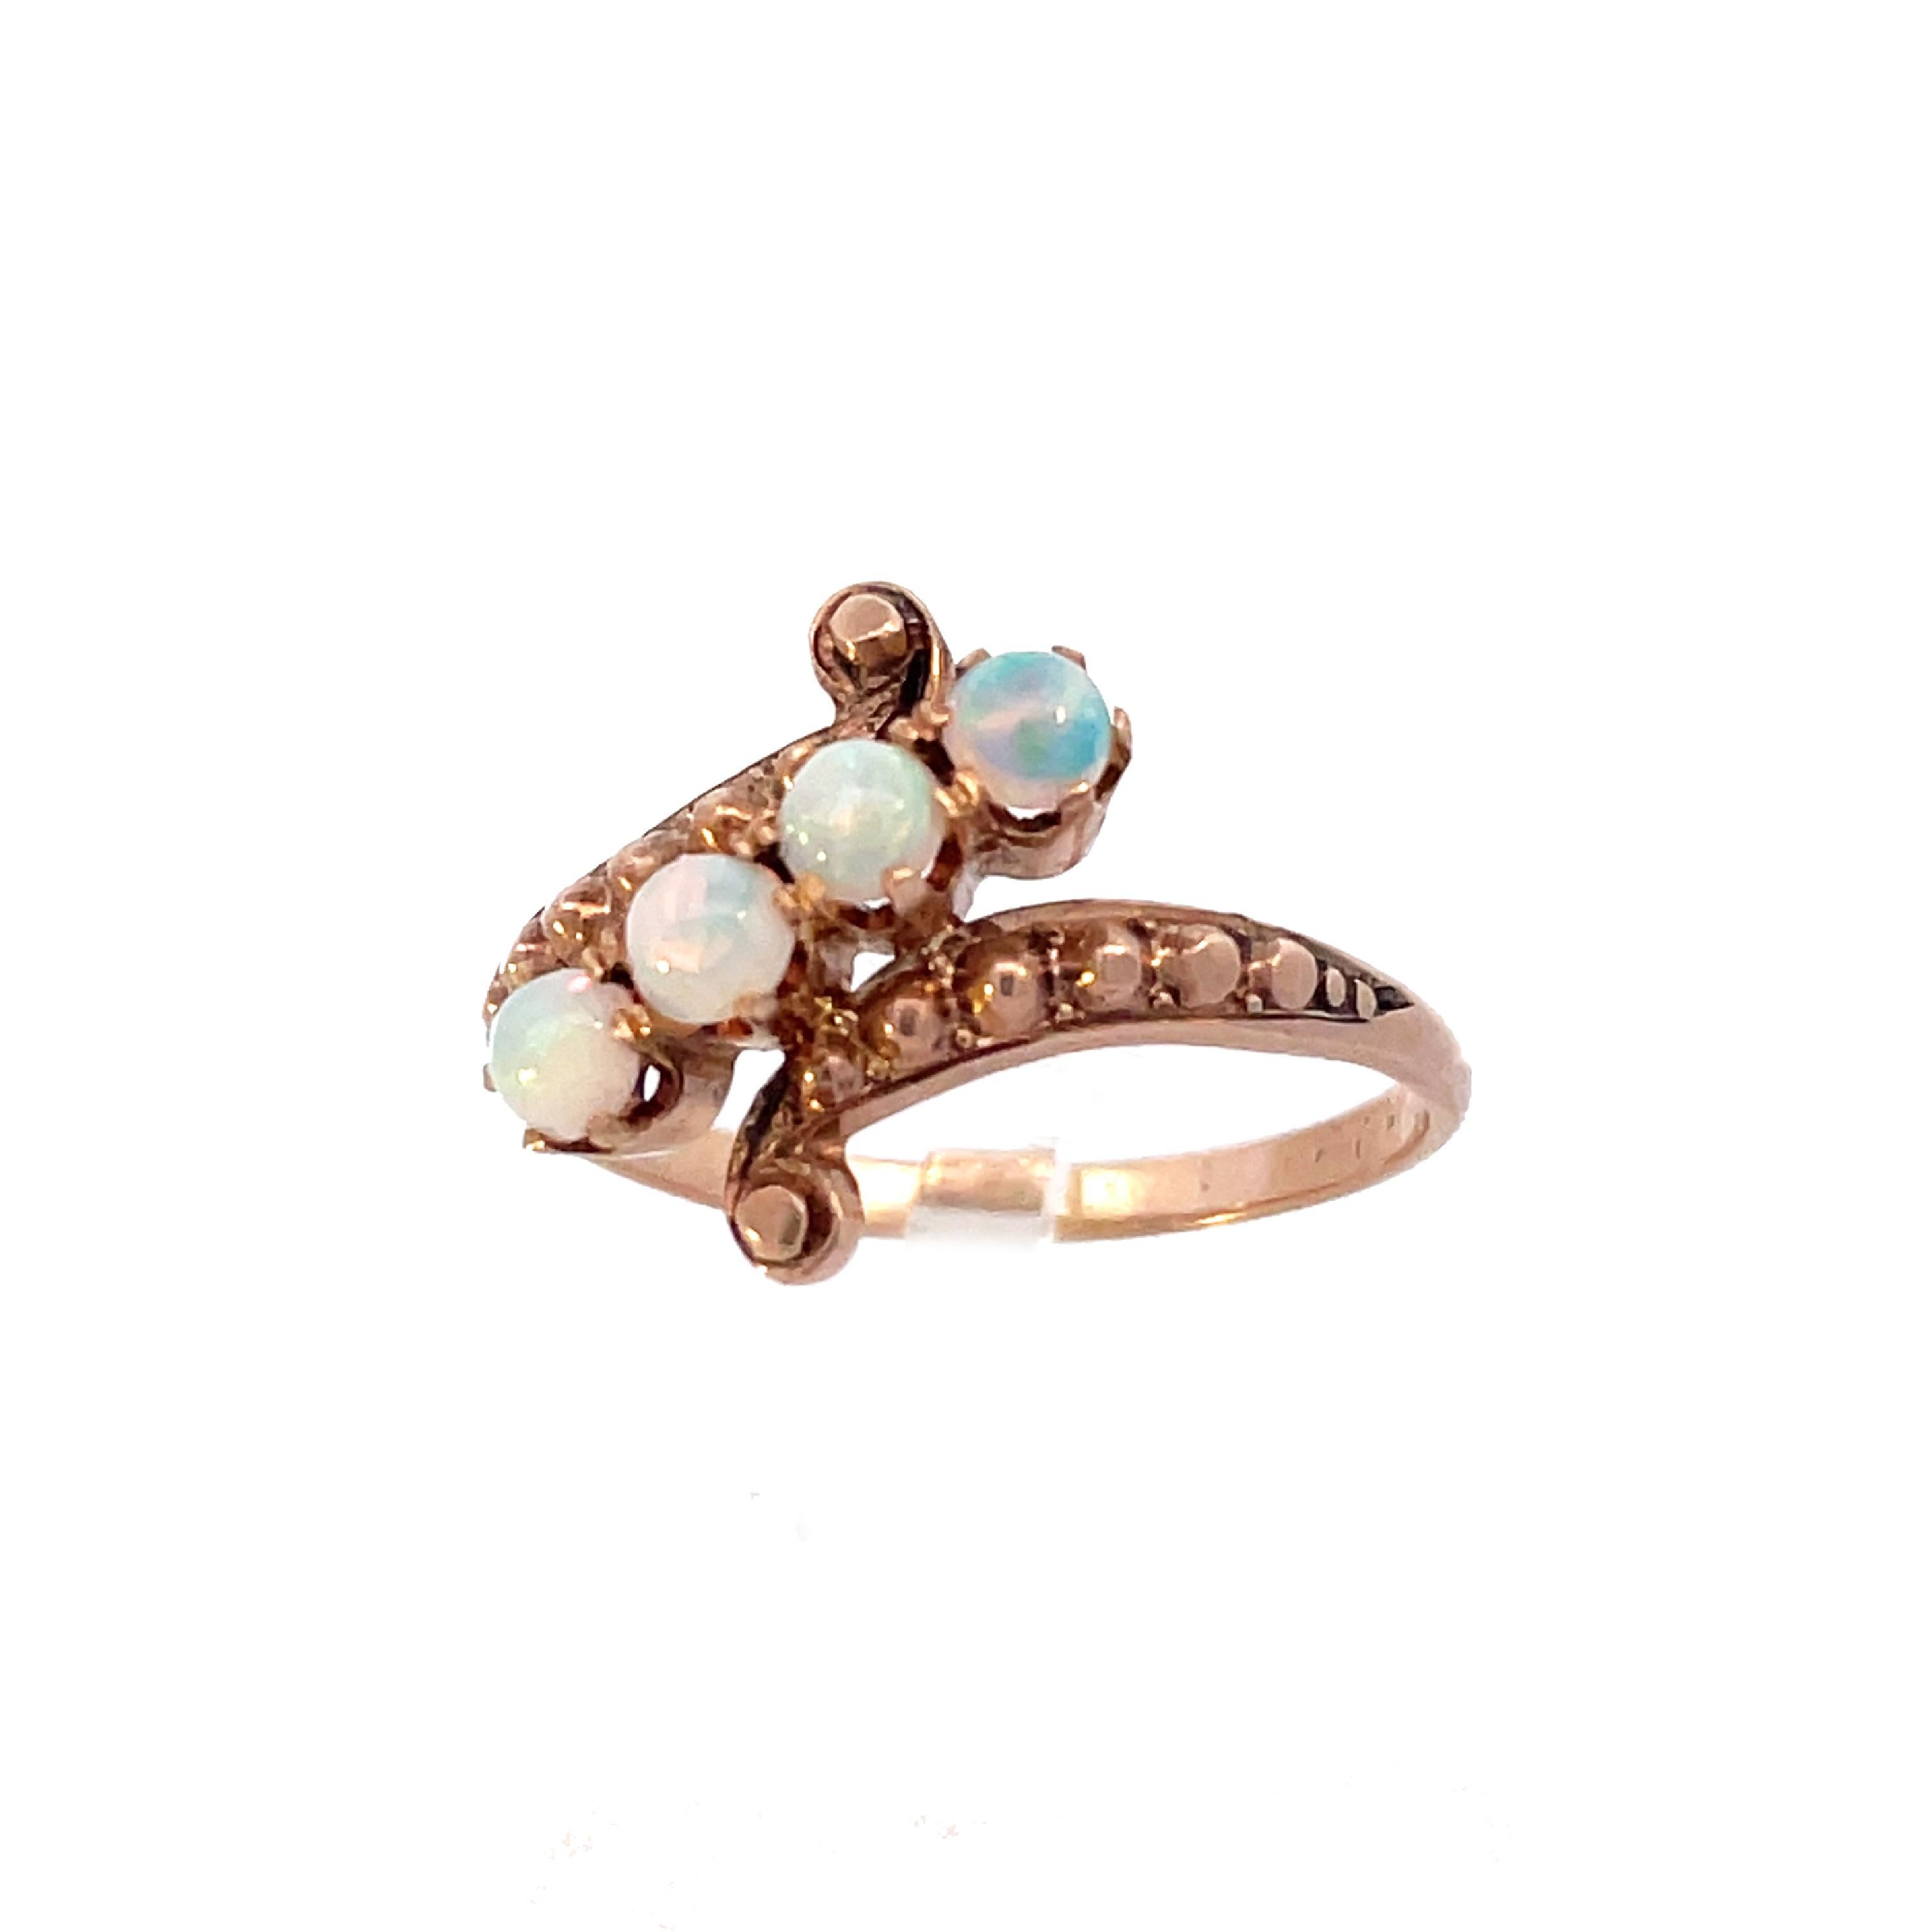 1890 Victorian 14K Yellow Gold White Opal Ring 1